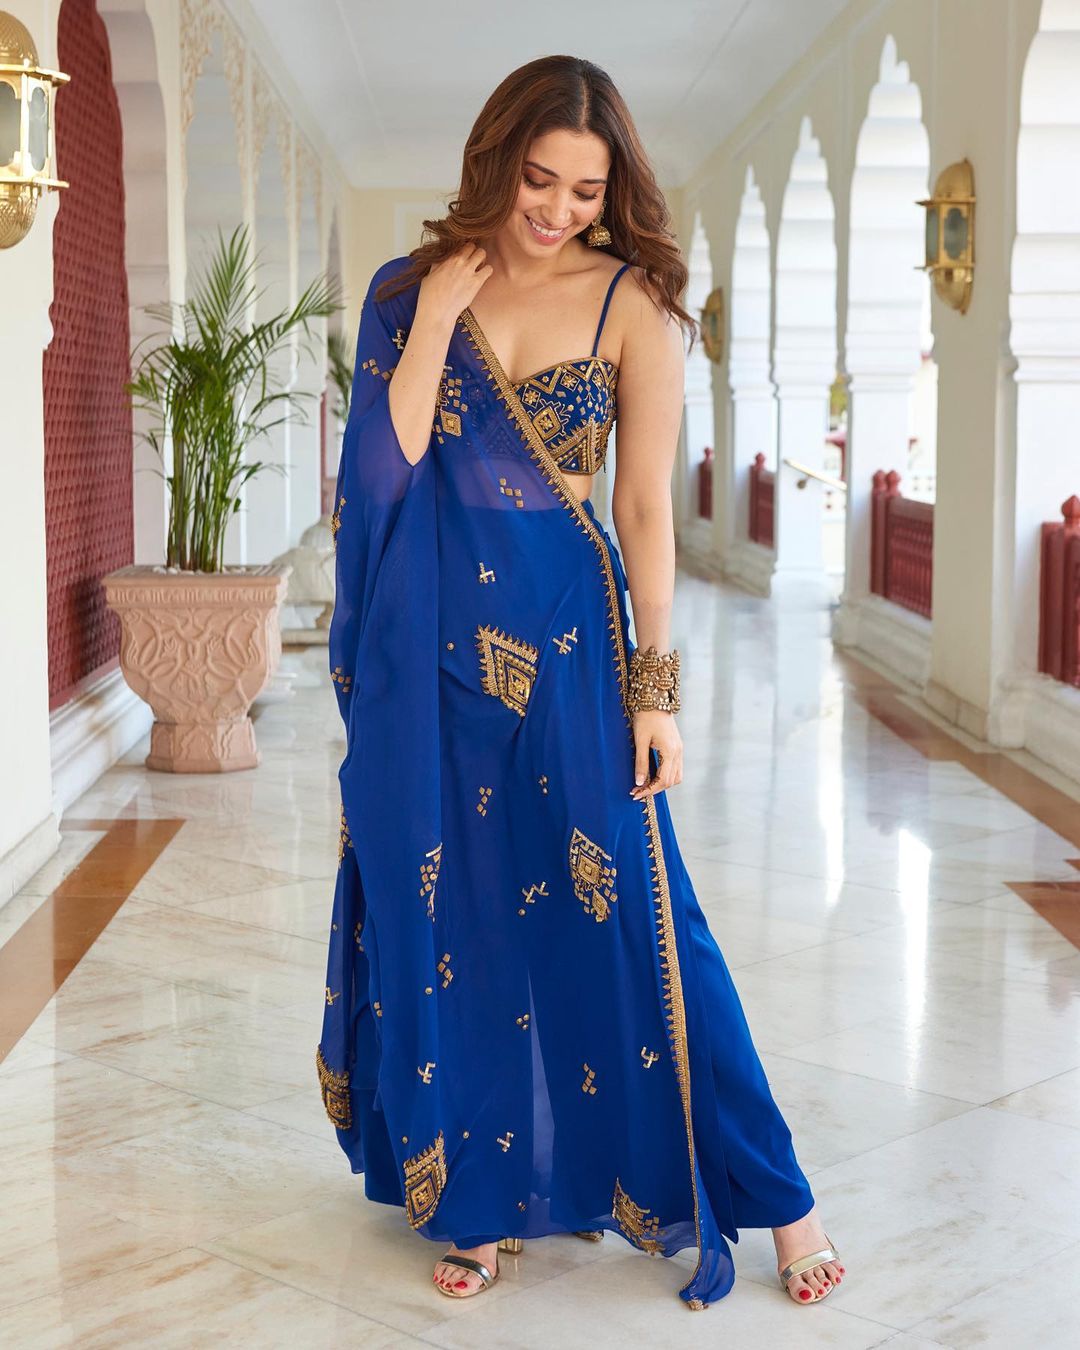 Royal blue lehenga where Tamannah can be seen in open cleavage choli with ornamented style plazo.